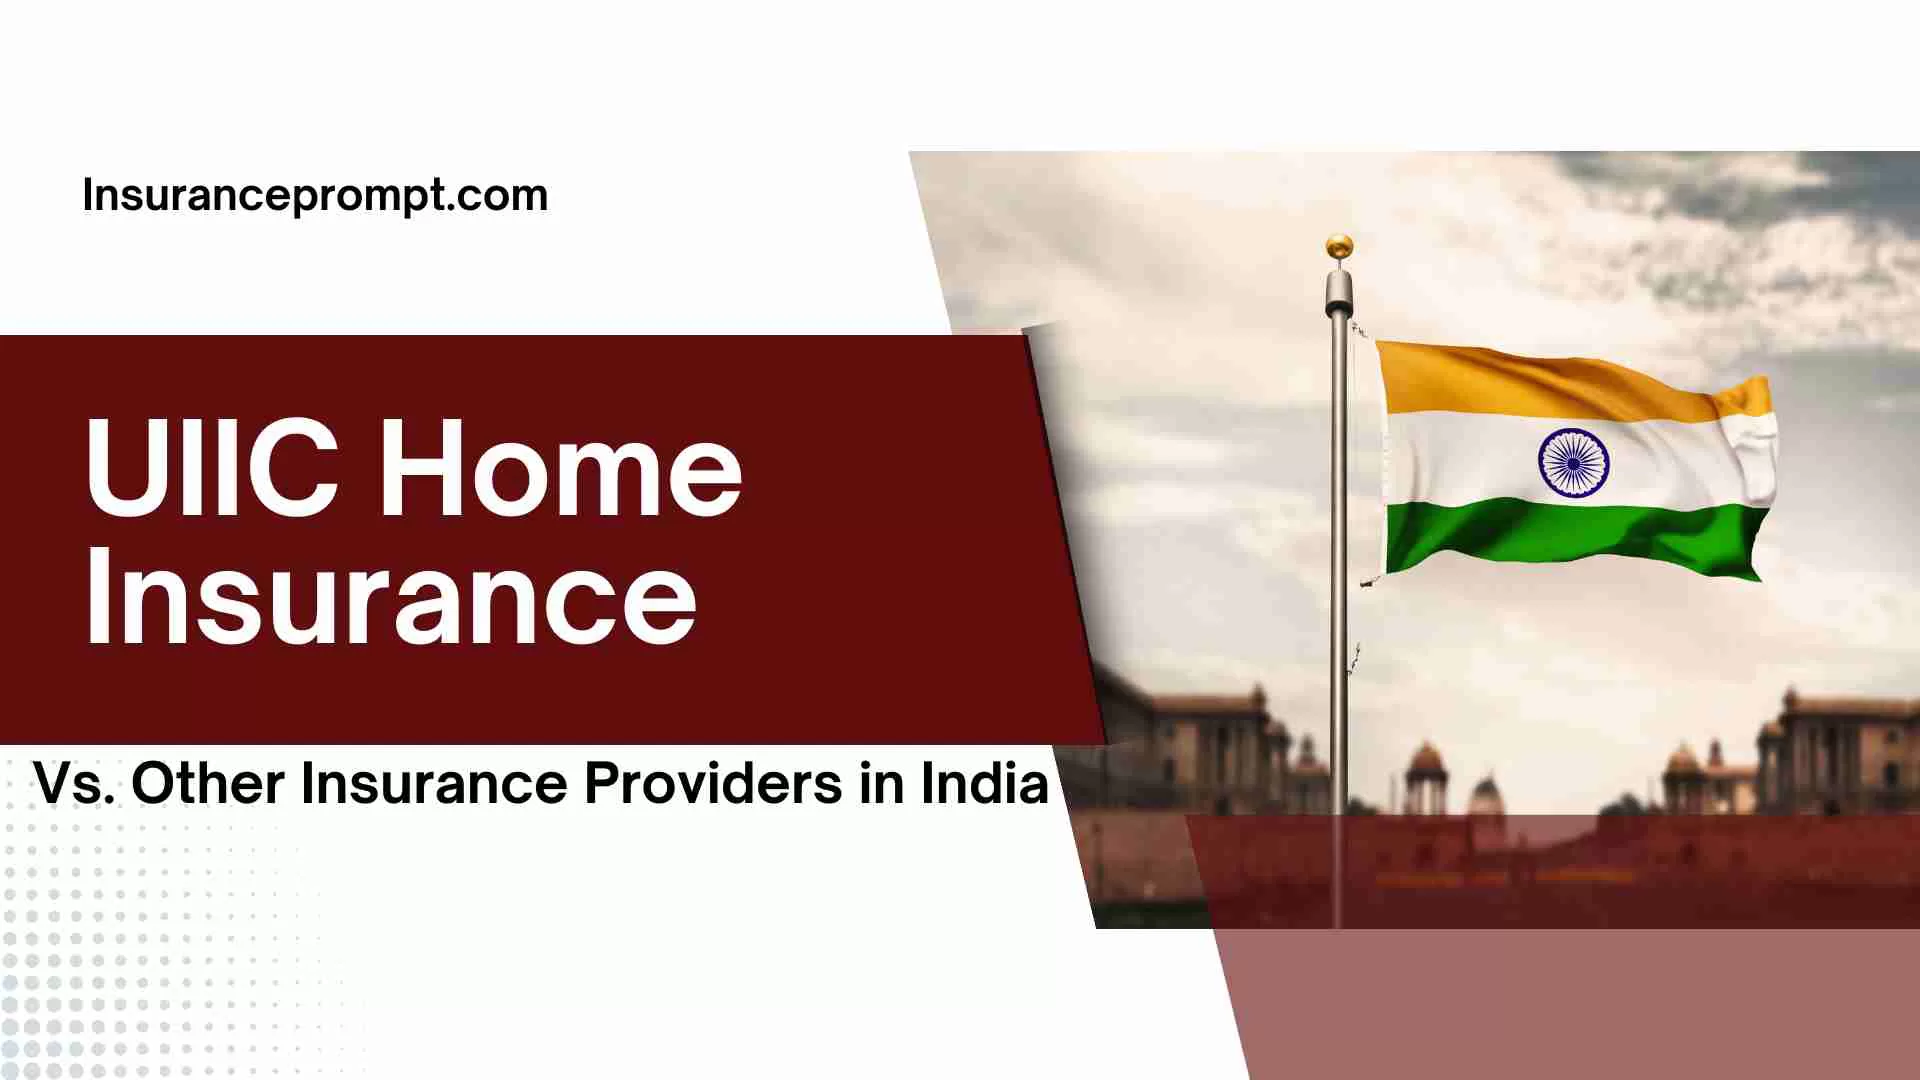 UIIC Home Insurance Vs. Other Insurance Providers in India